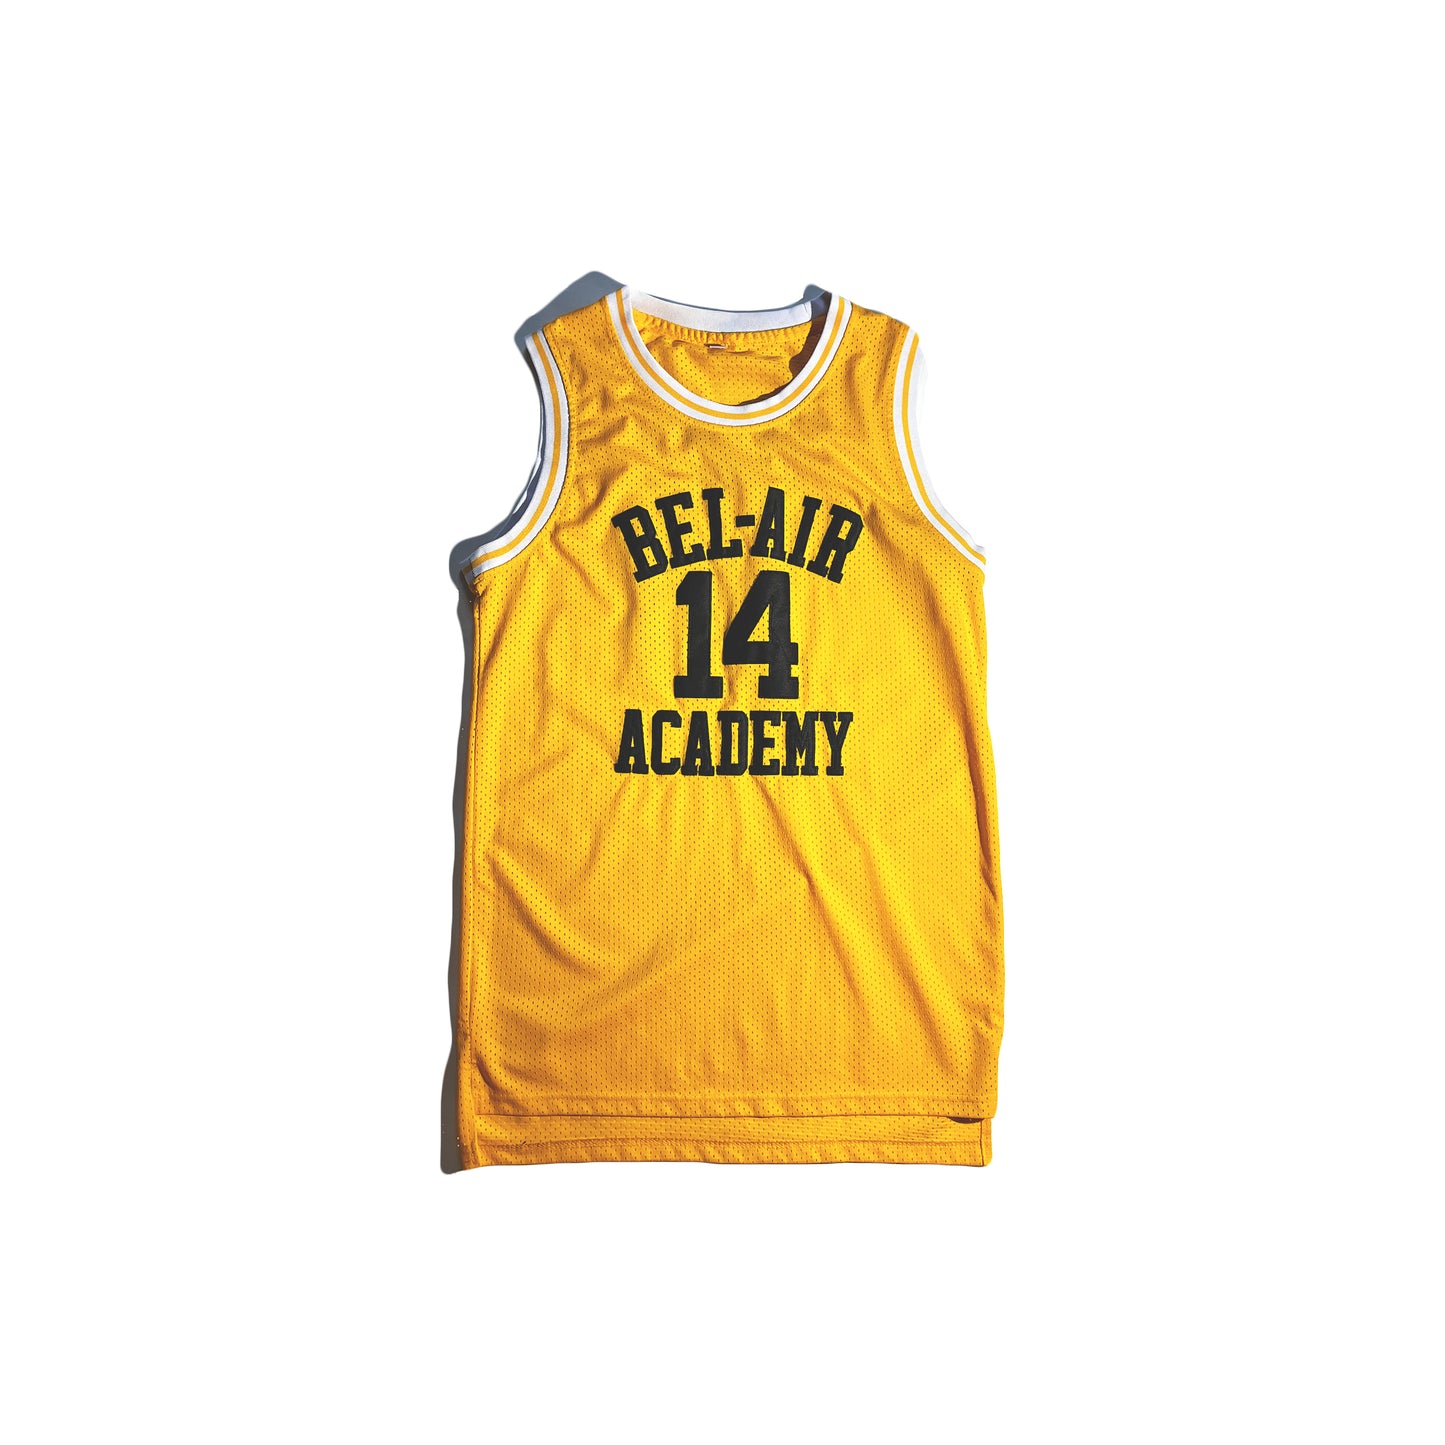 Vintage Will Smith Bel Air Jersey Basketball